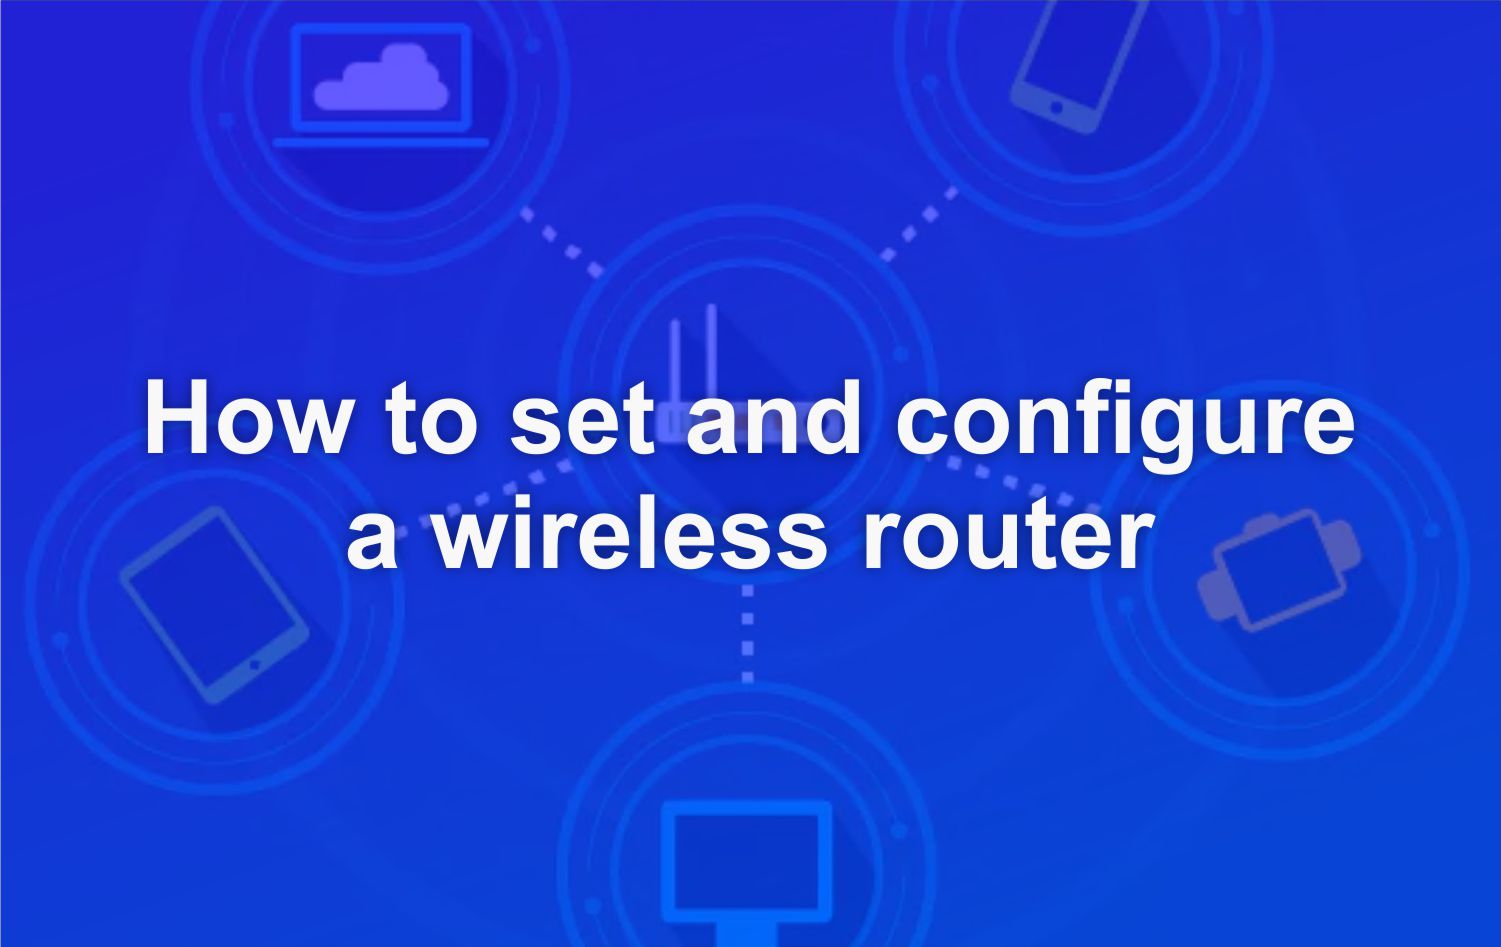 How to set and configure a wireless router